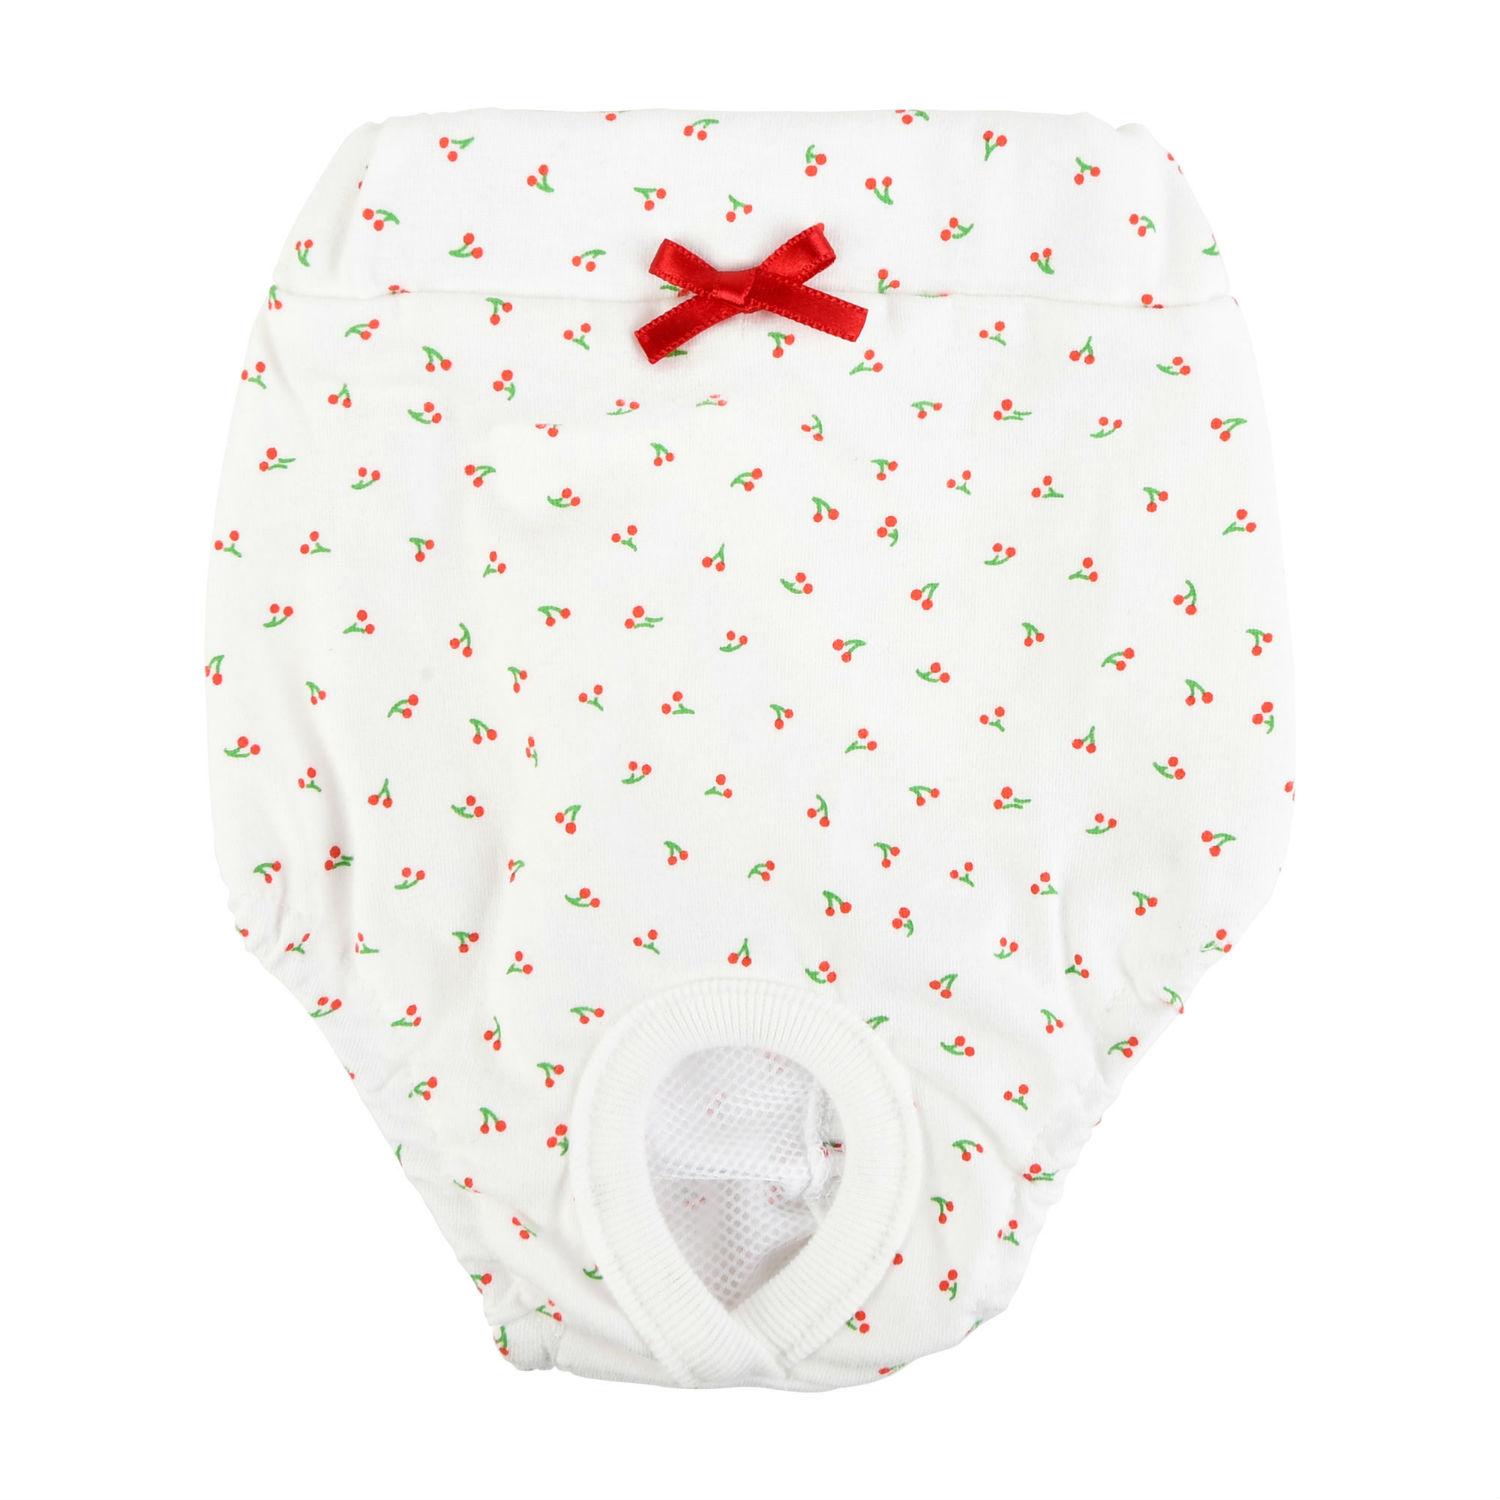 Sherie Dog Sanitary Pants by Pinkaholic - Ivory